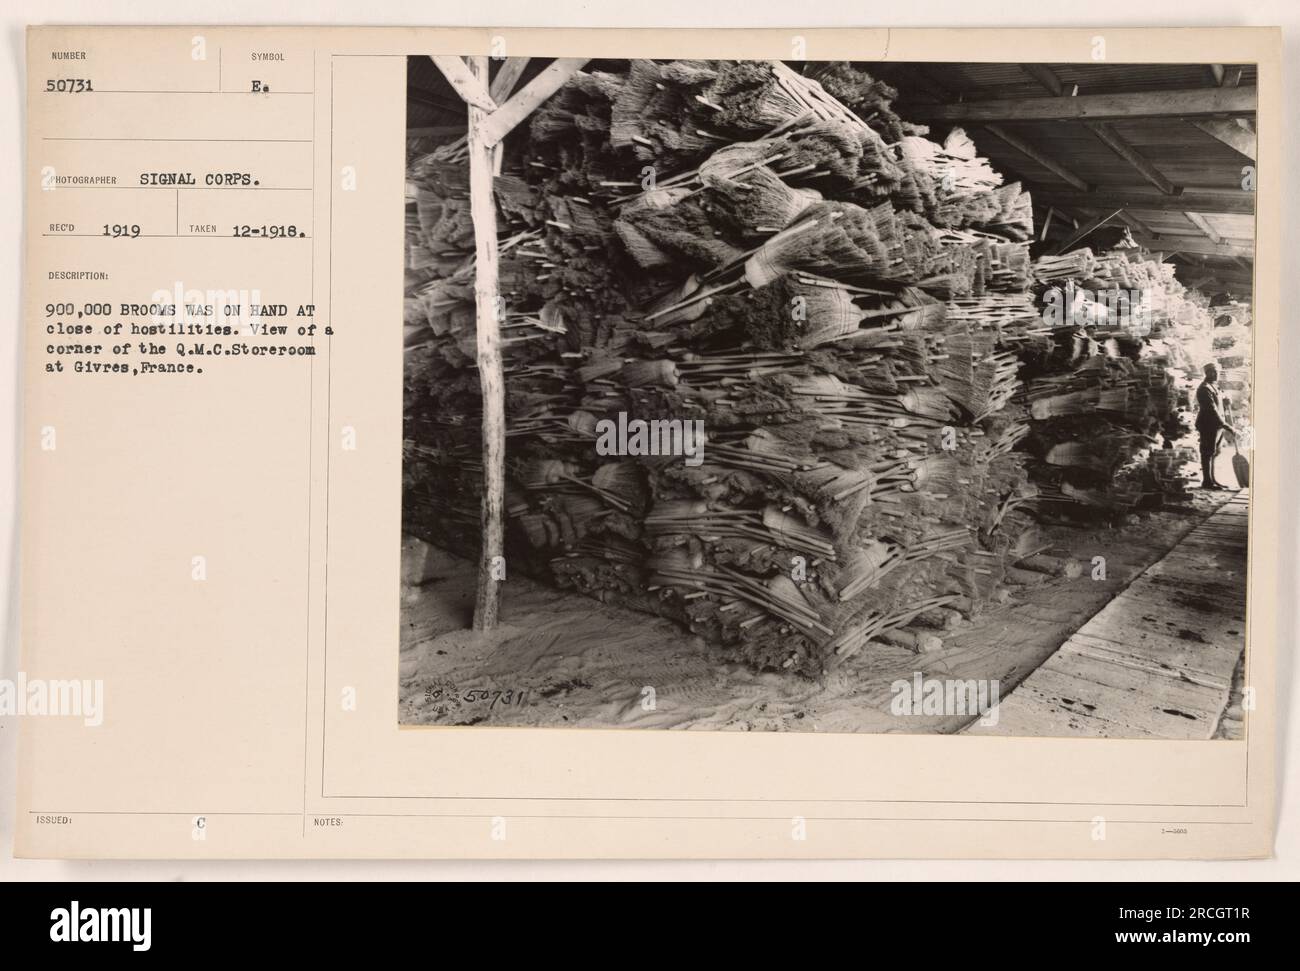 A view of a corner of the Q.M.C. Storeroom at Givres, France. In December 1918, at the close of hostilities, there were 900,000 brooms in the storeroom. This photograph was taken by E. Eco in 1919 and is part of the NUMOTE 50731 collection of the Signal Corps. Stock Photo